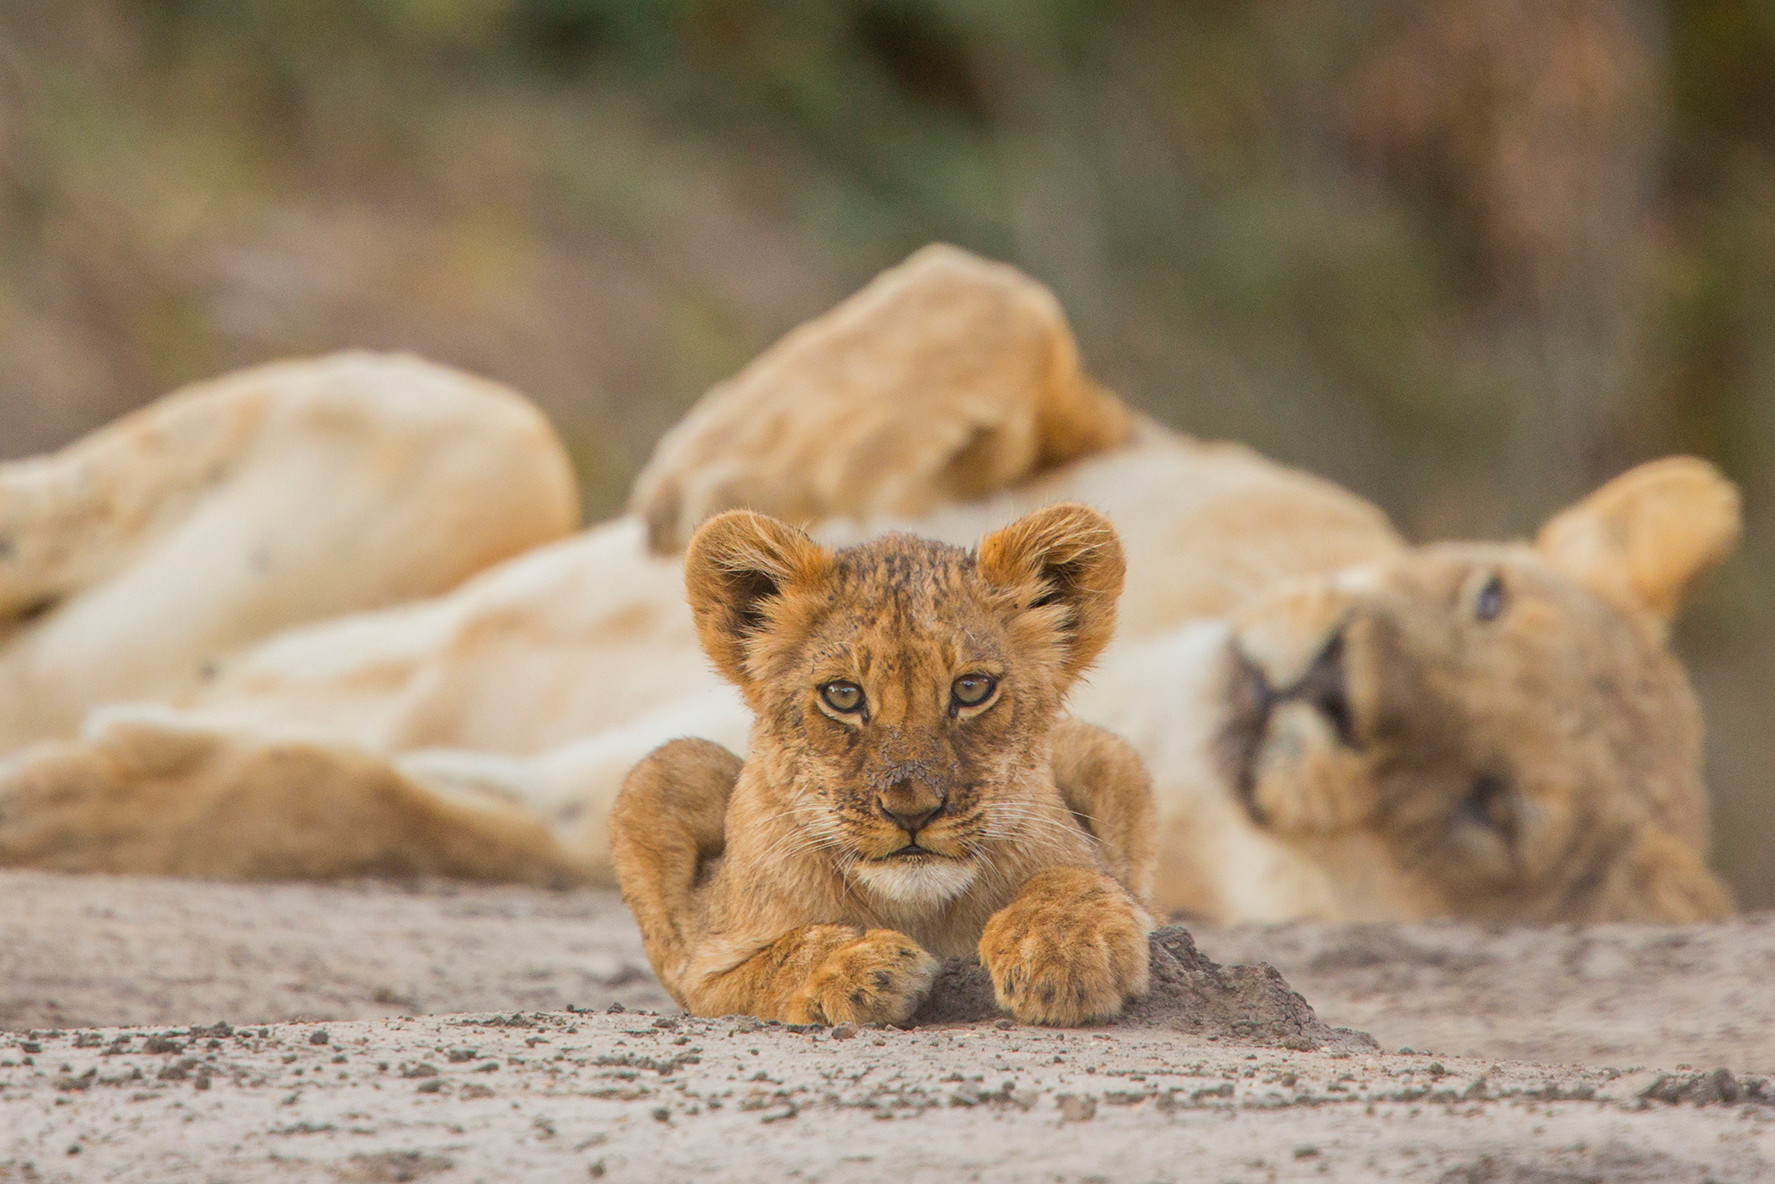 A wild lion cub looks at the photographer while his mother dozes in the background in a national park in Zimbabwe.